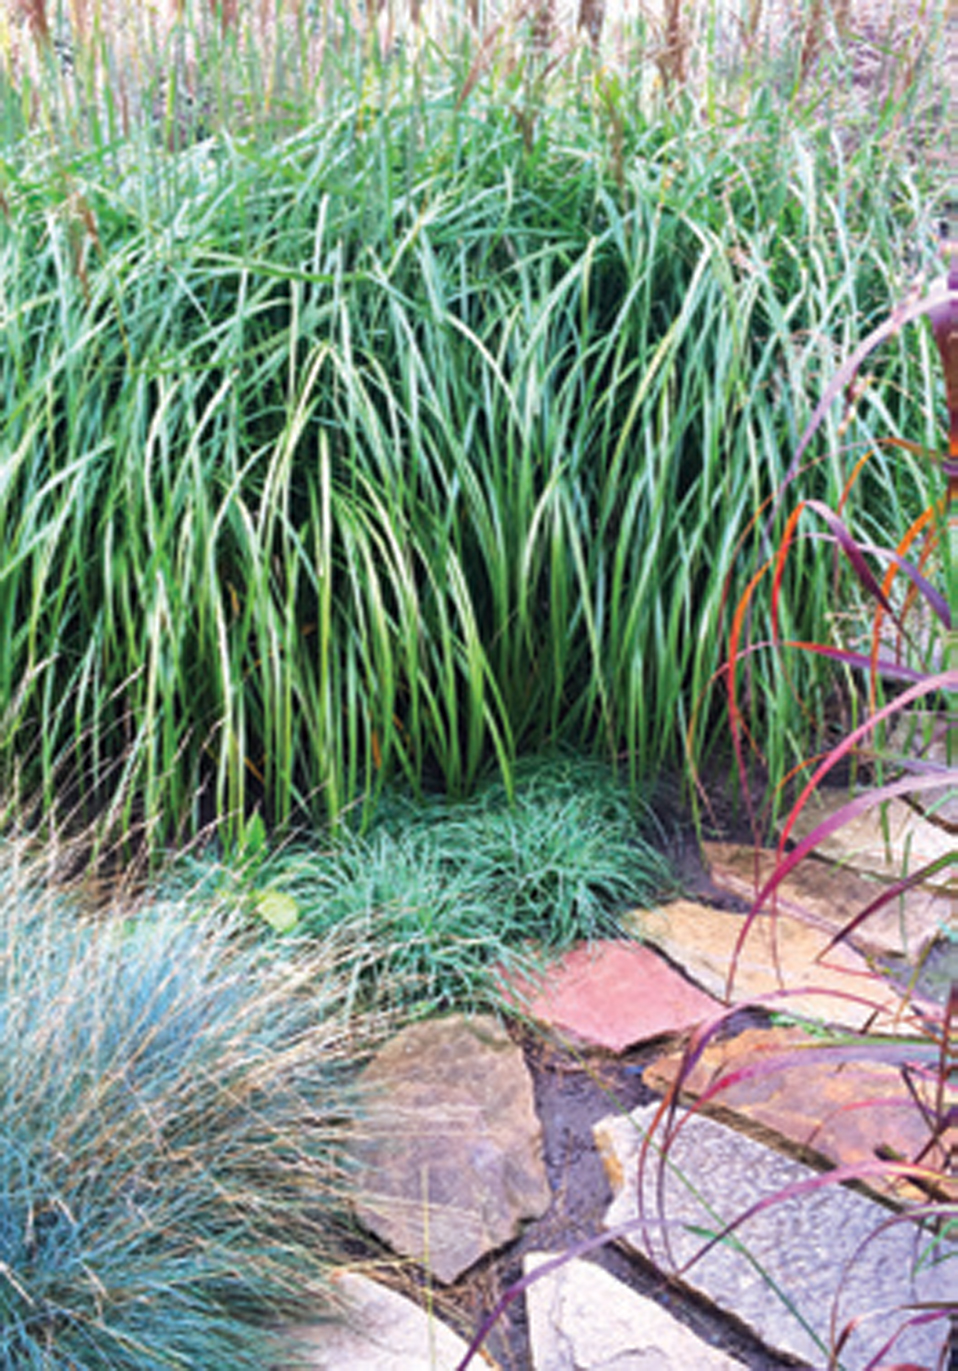 Decorative grass and stone path in the garden